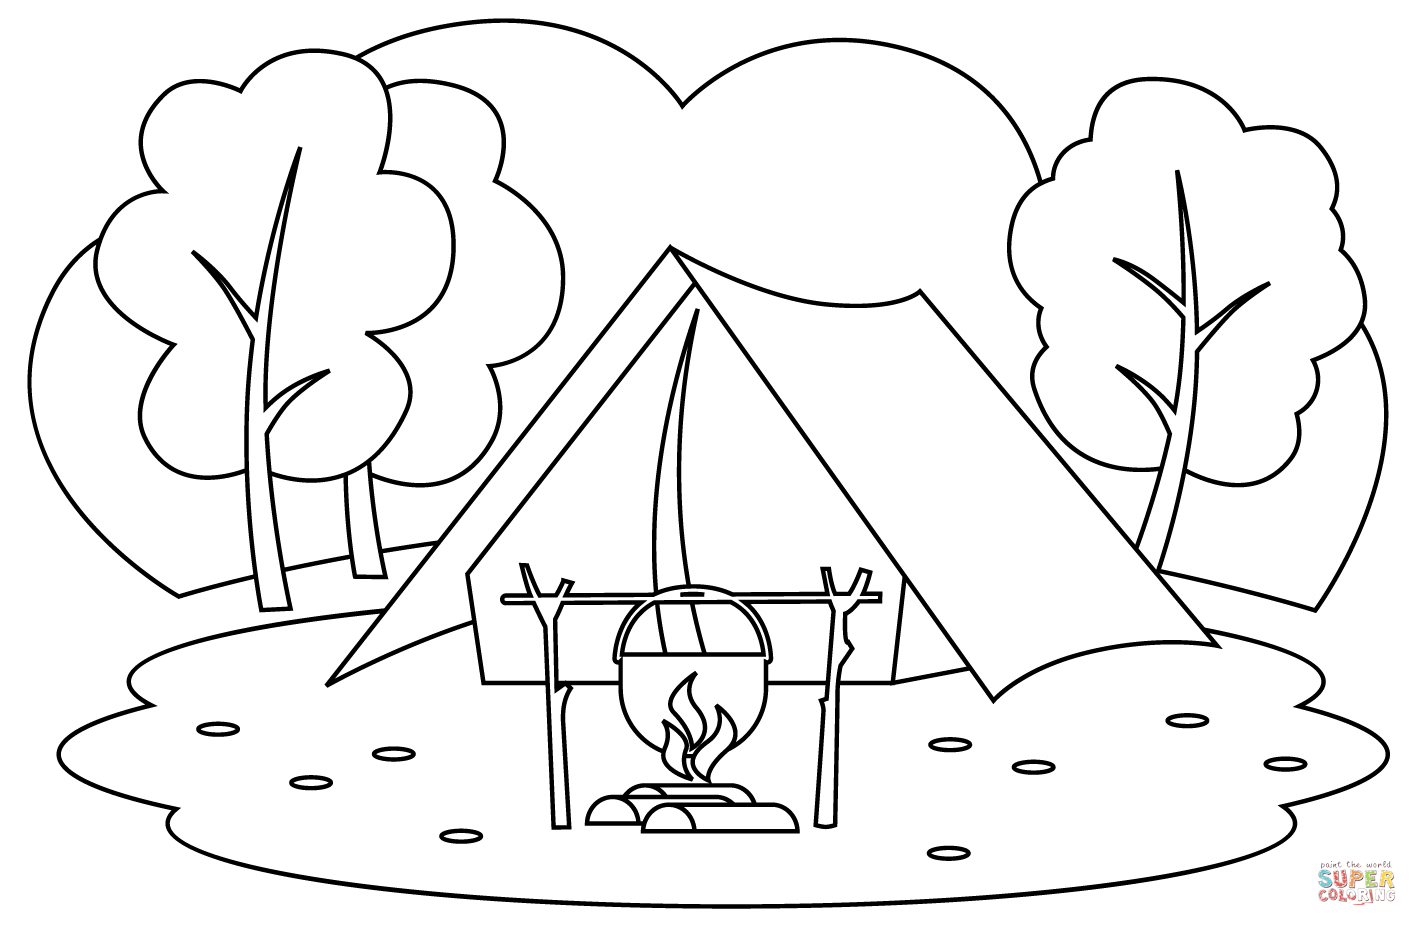 Summer camp coloring page free printable coloring pages